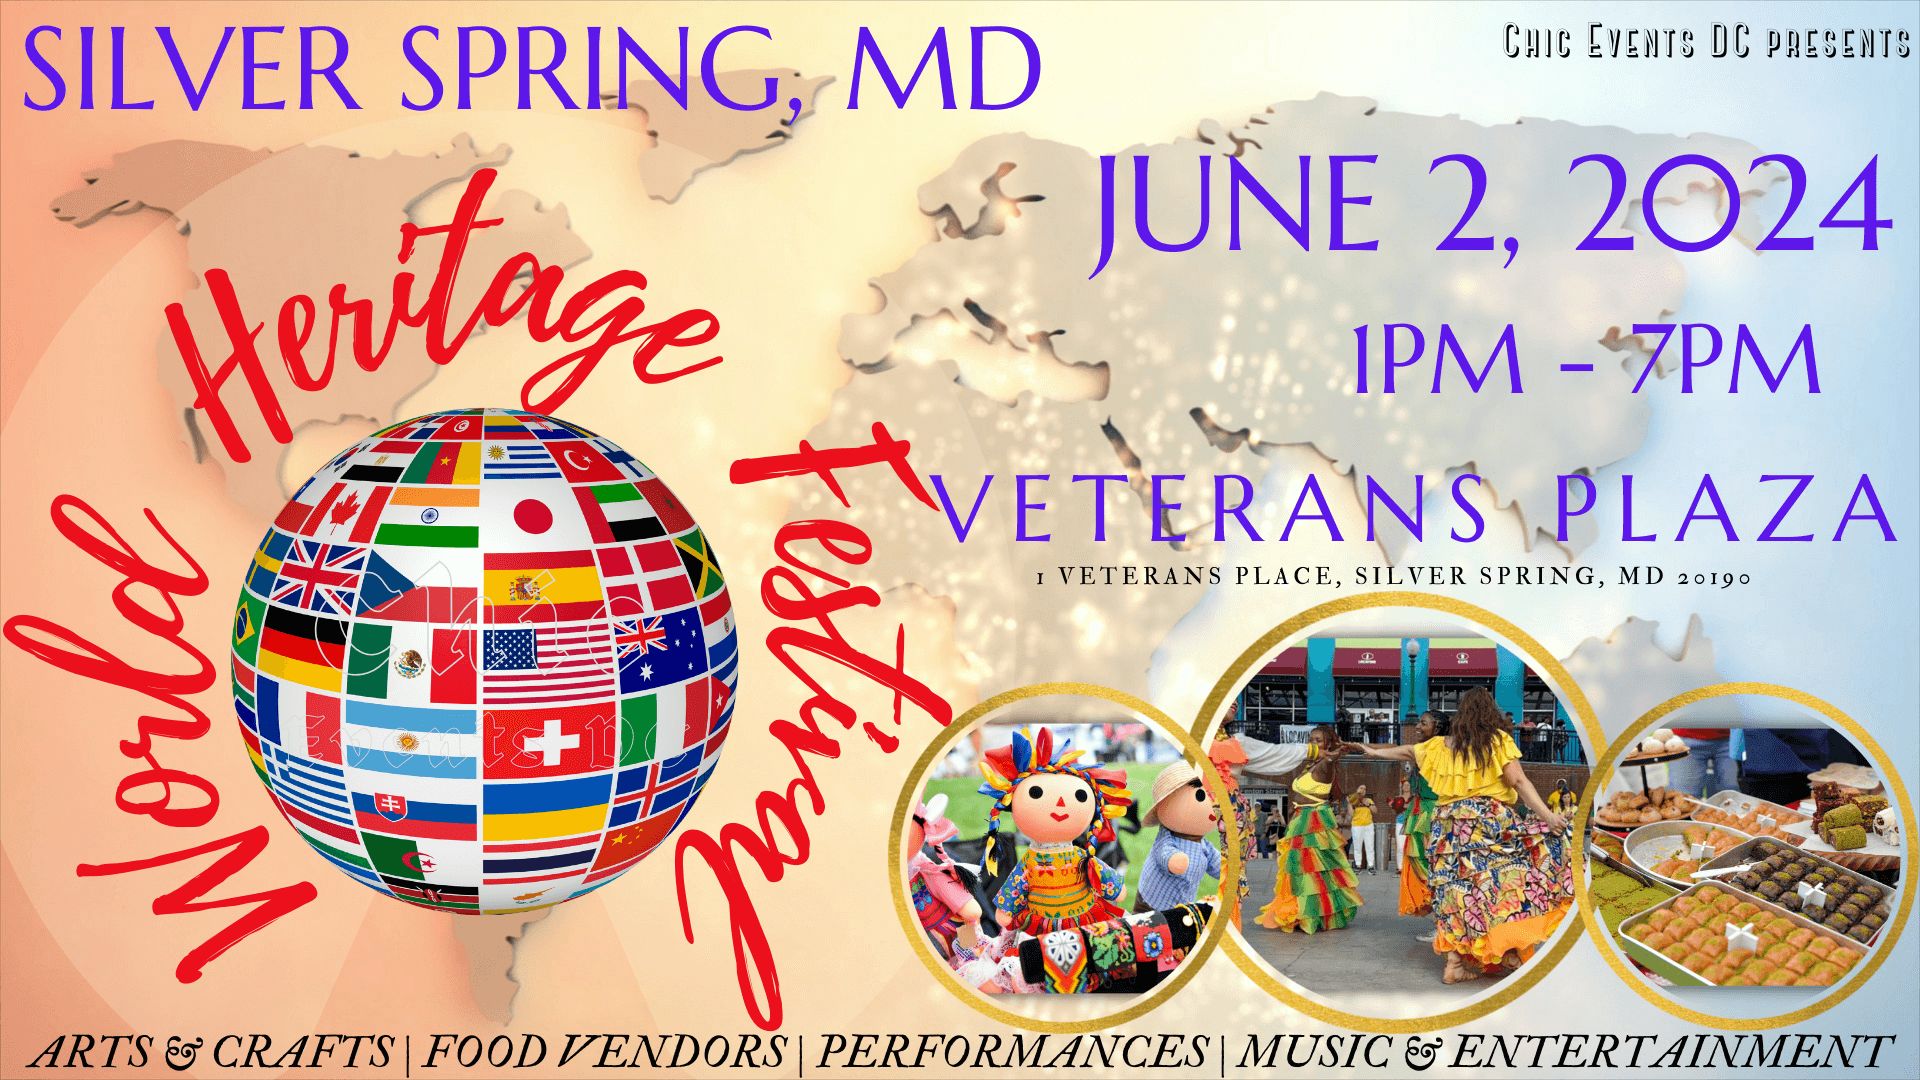 World Heritage Festival @ Veterans Plaza, Silver Spring, MD, Silver Spring, Maryland, United States